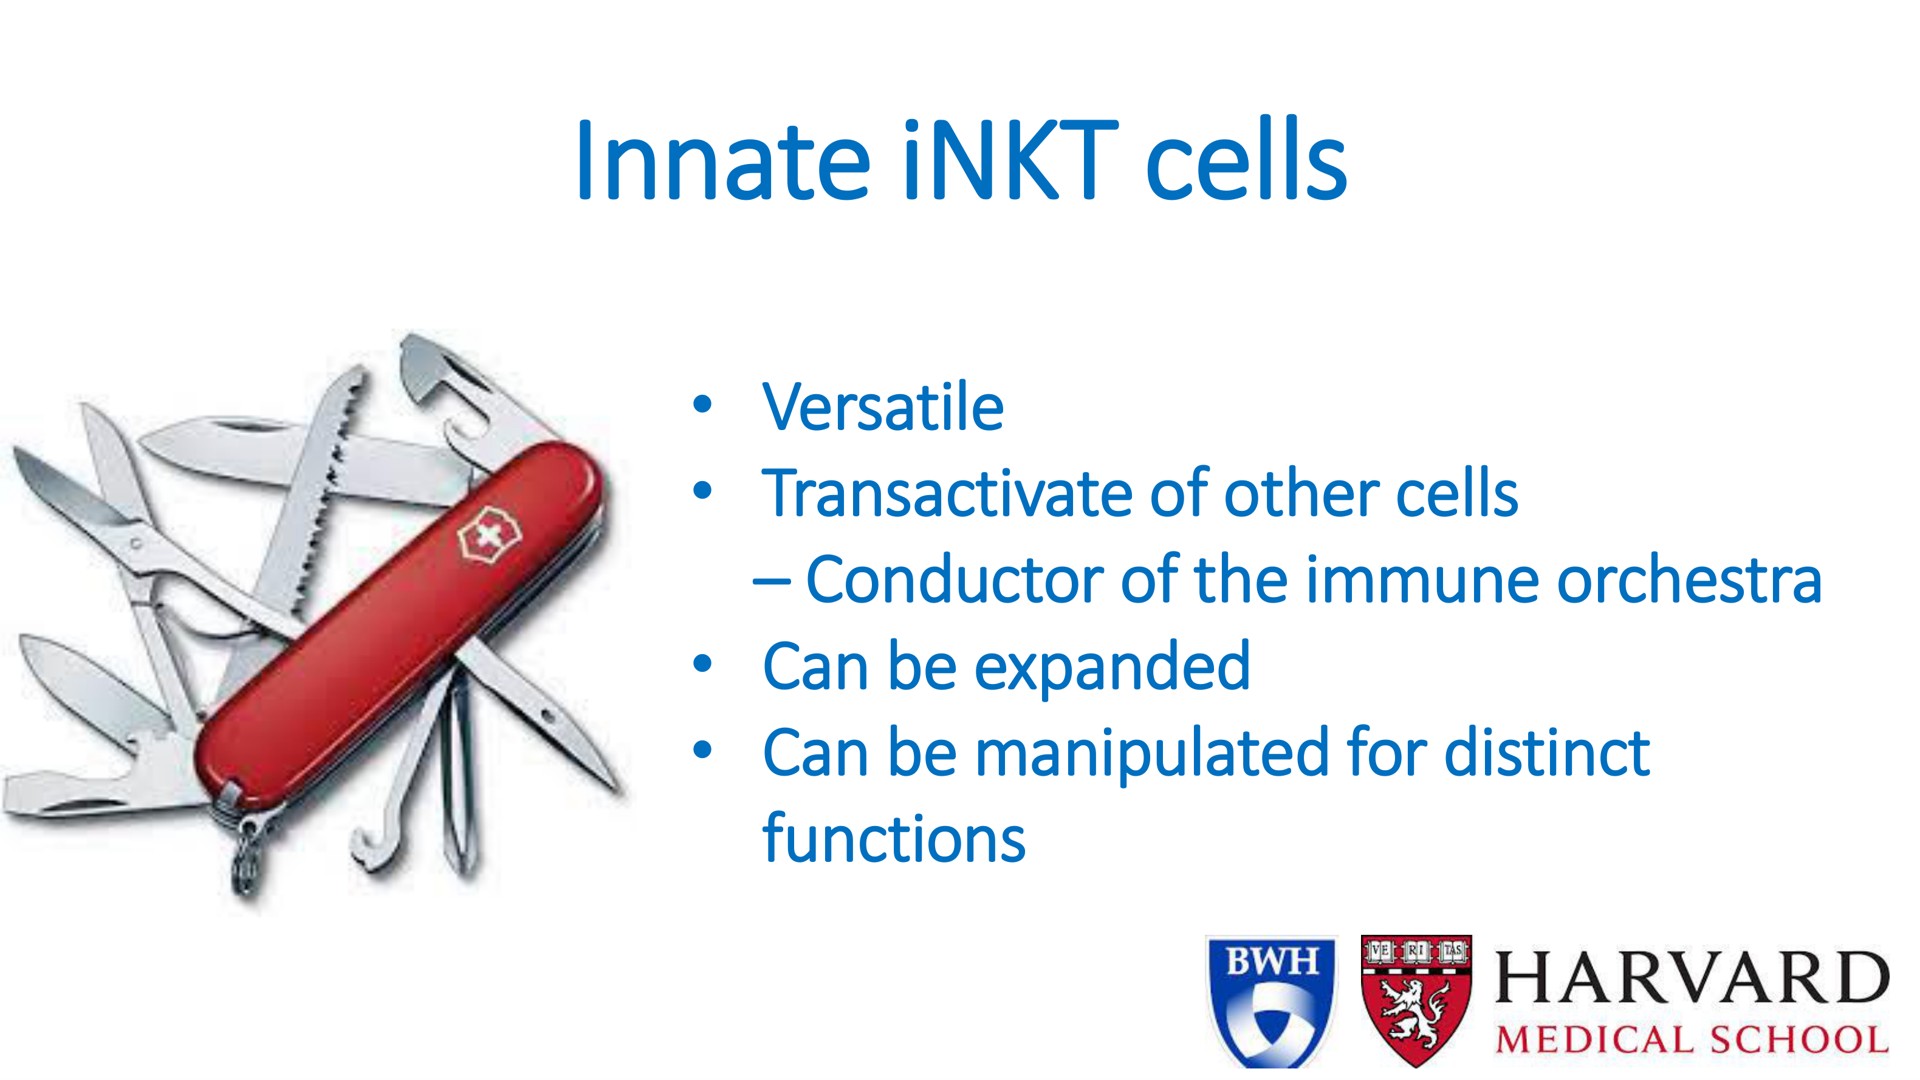 innate cells versatile of other cells conductor of the immune orchestra can be expanded can be manipulated for distinct functions | Mink Therapeutics